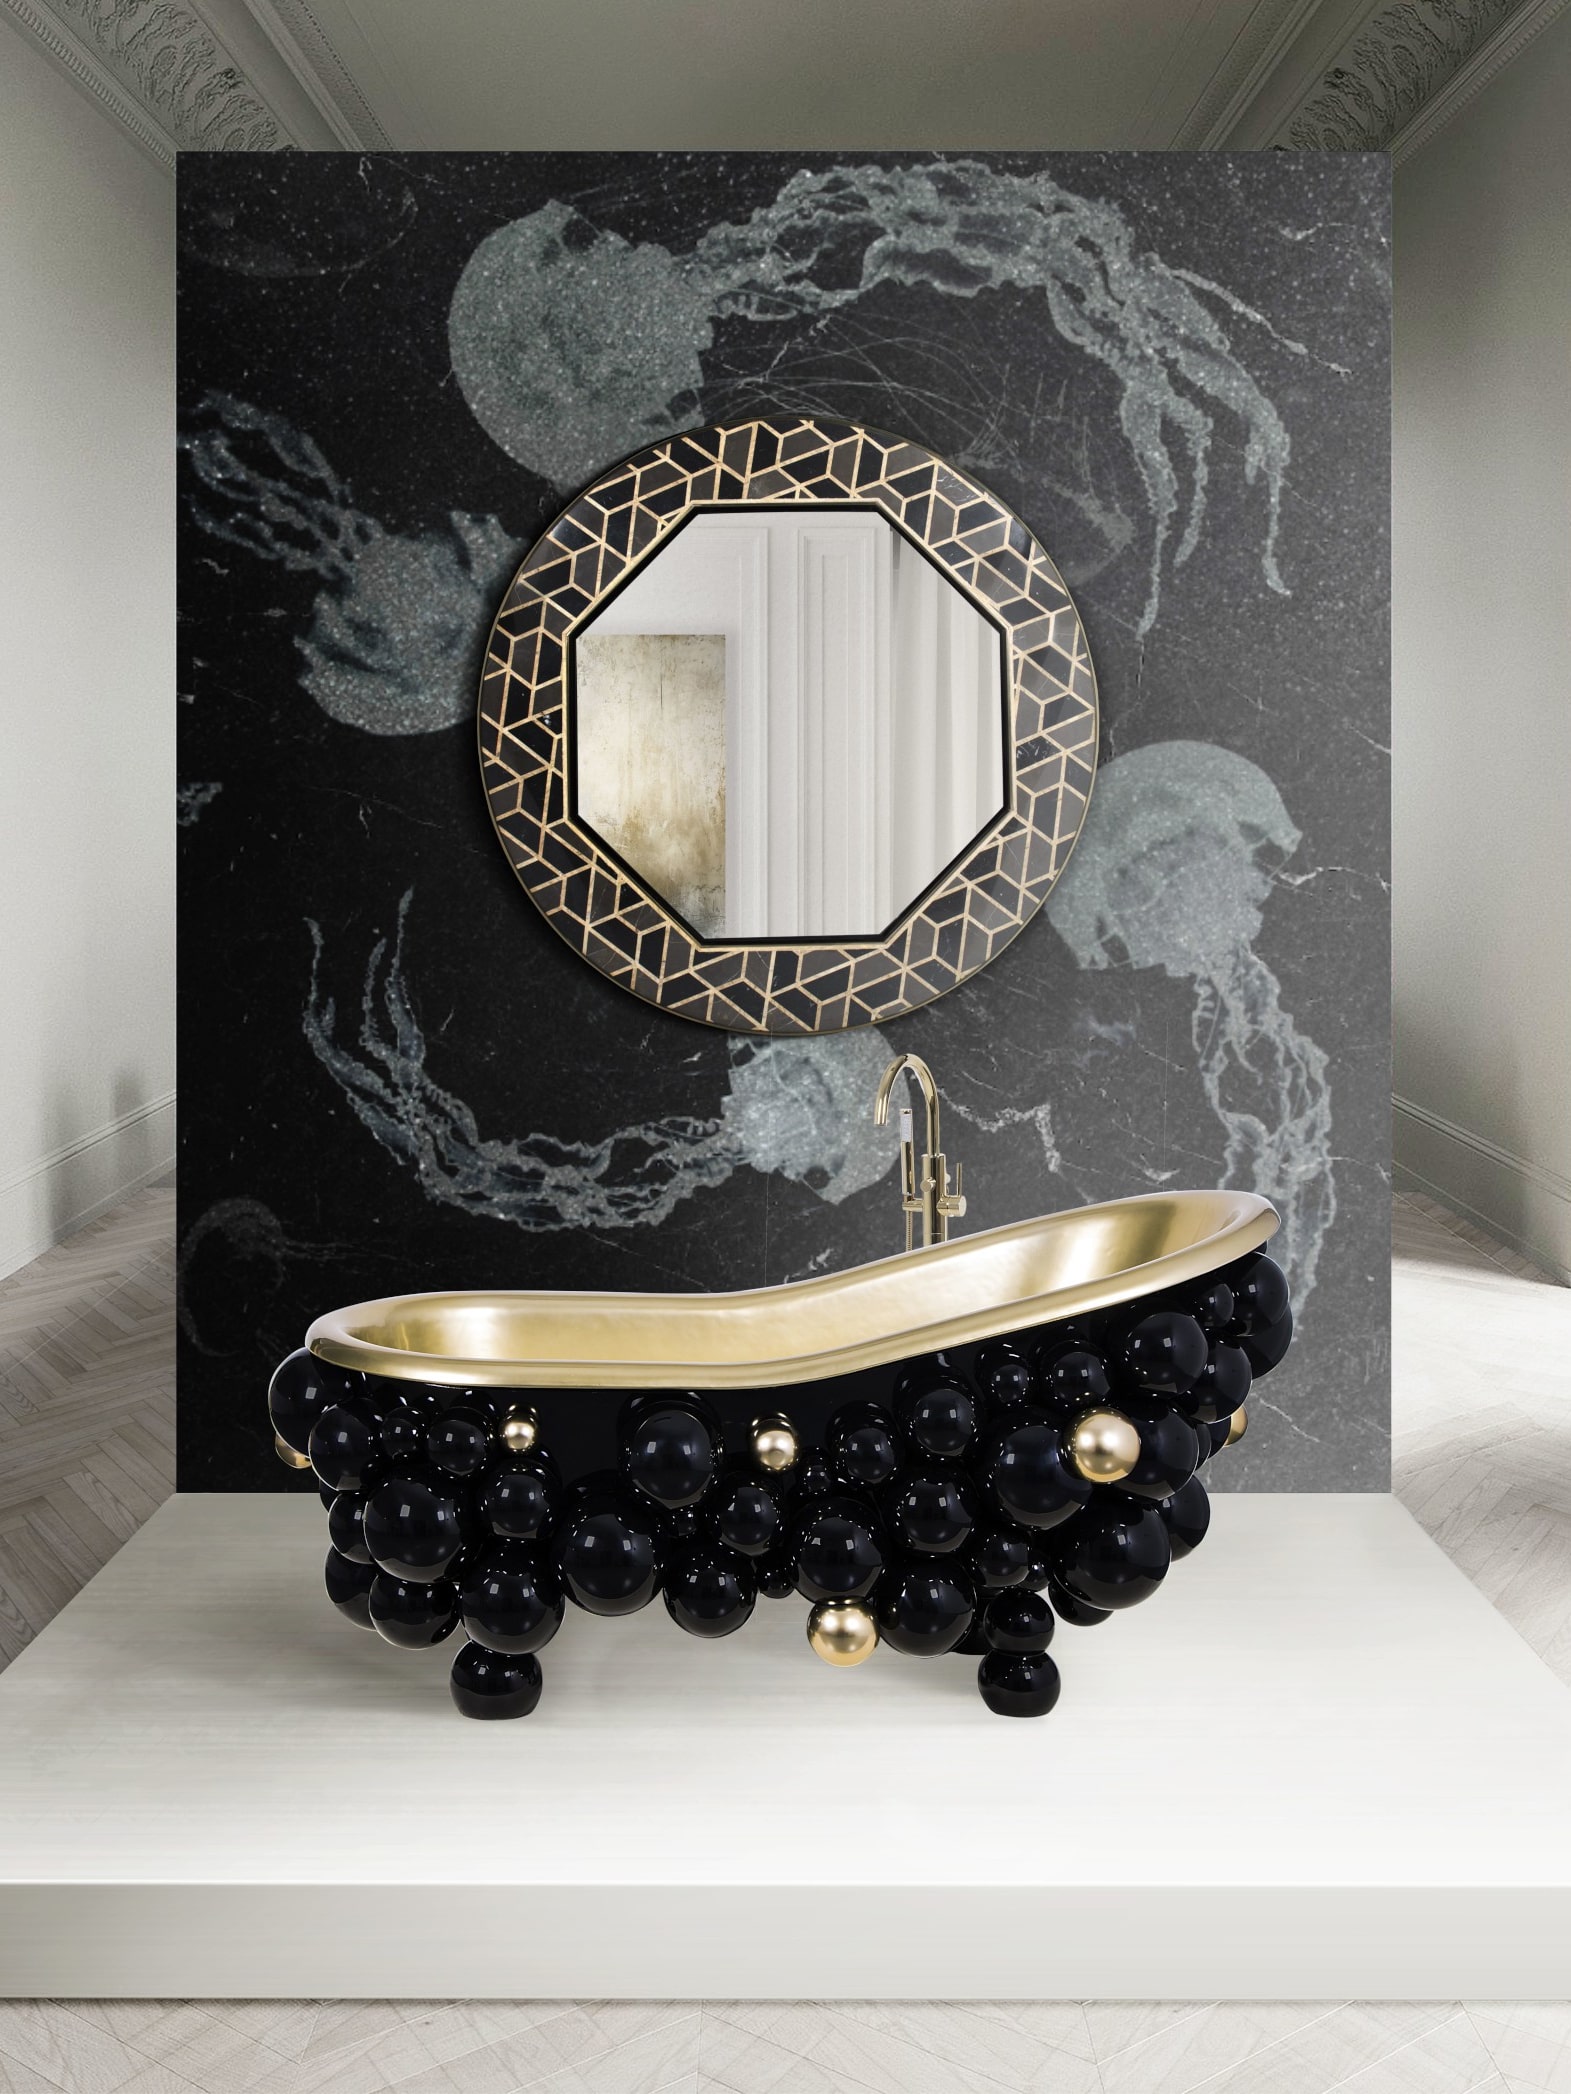 Outstanding Refined Master Bathroom In Black And Gold - Home'Society